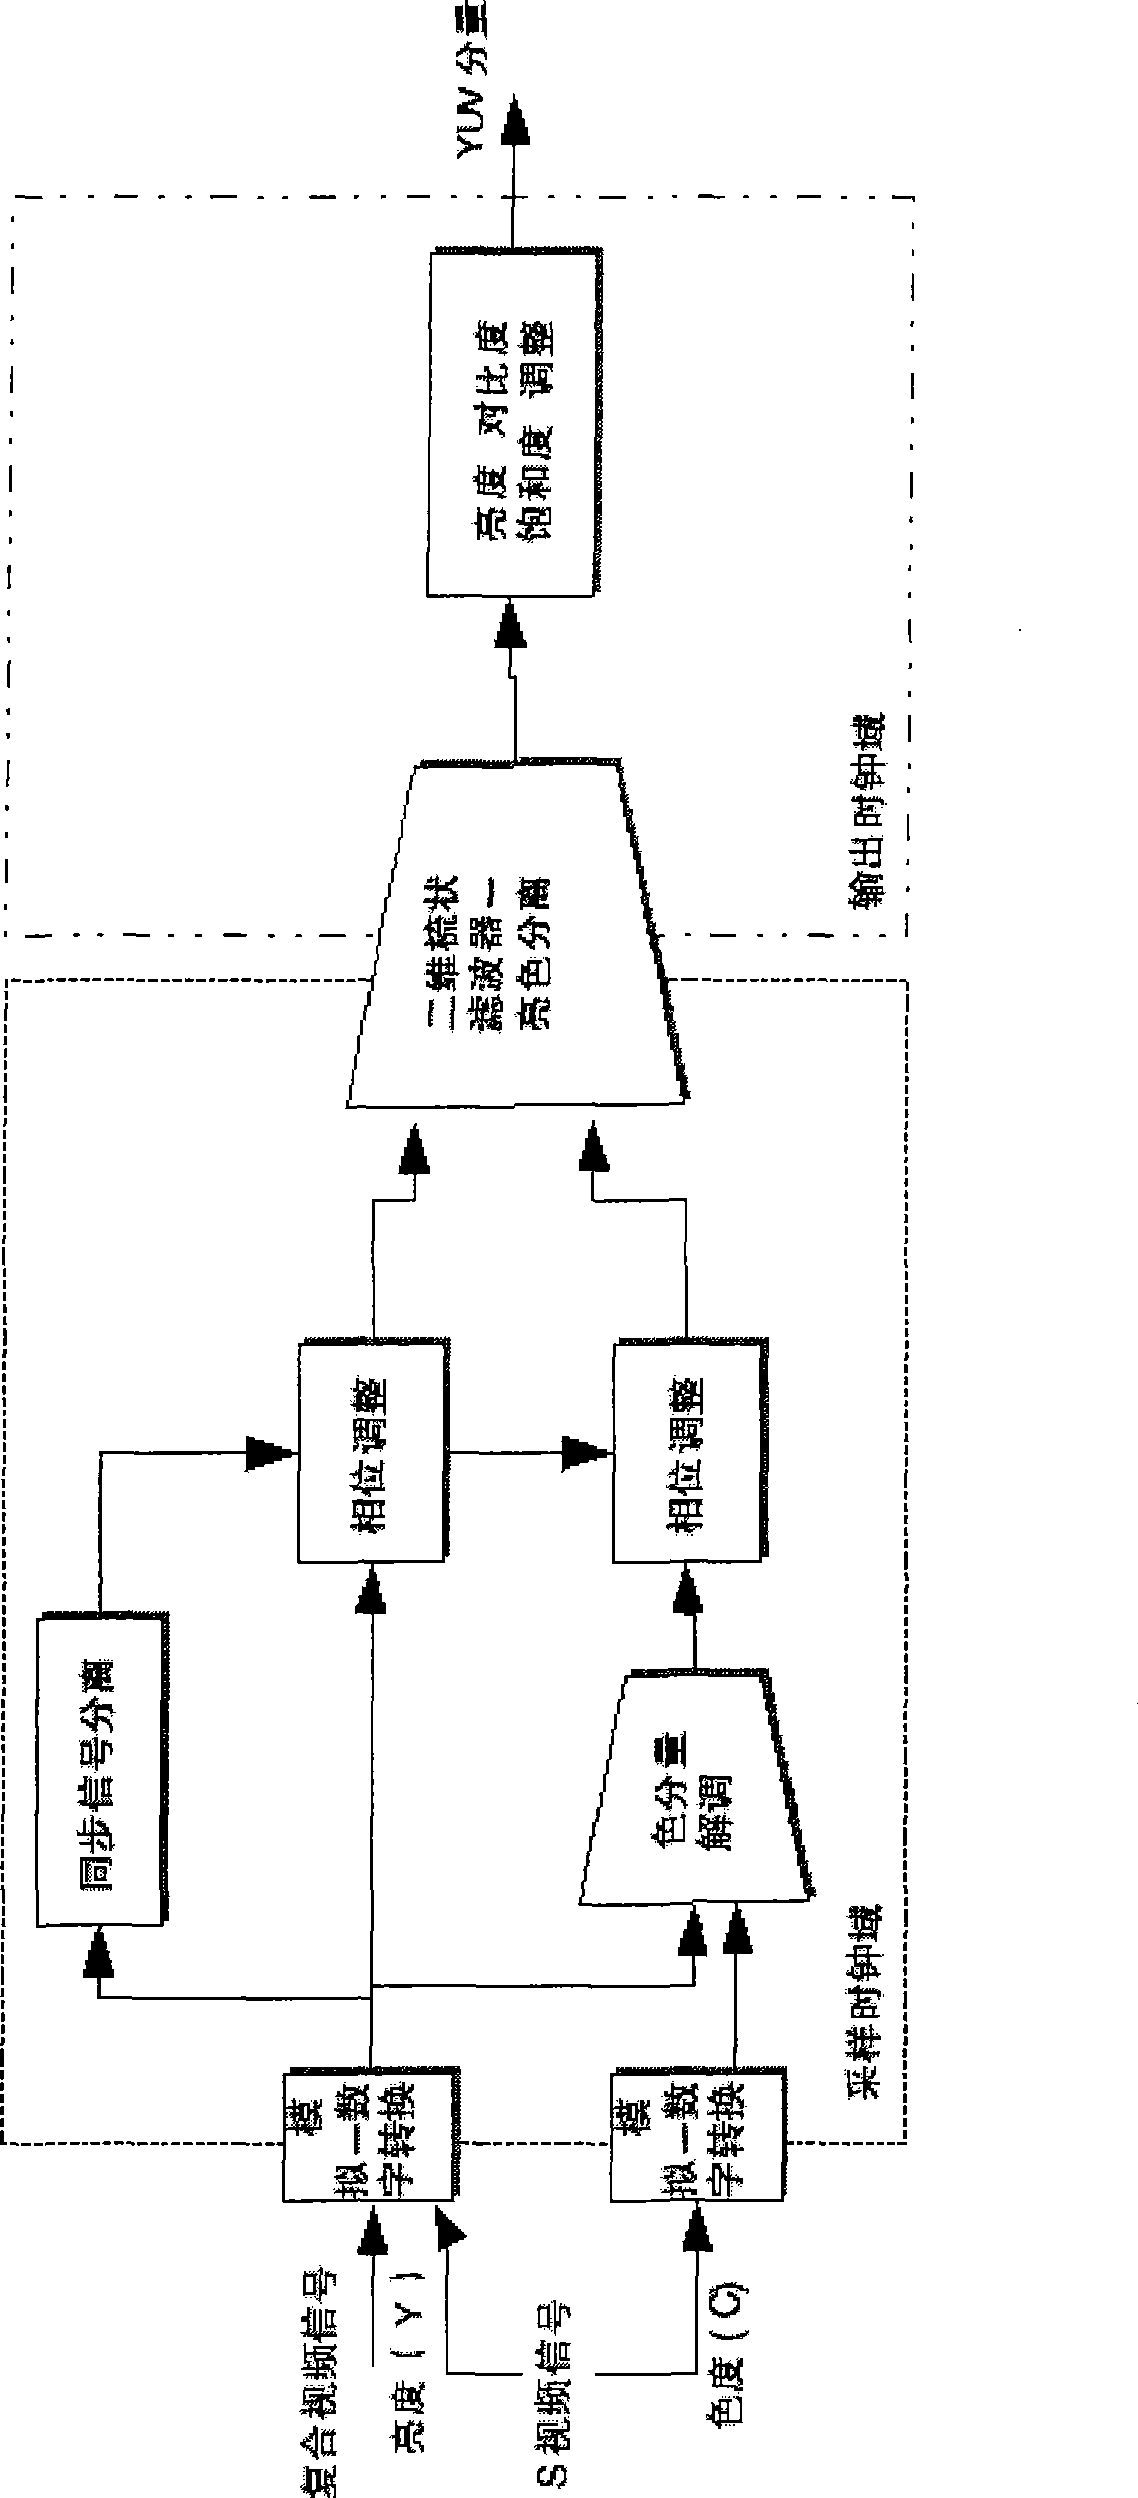 Digital demodulation method for non-synchronous composite video signal and S video signal